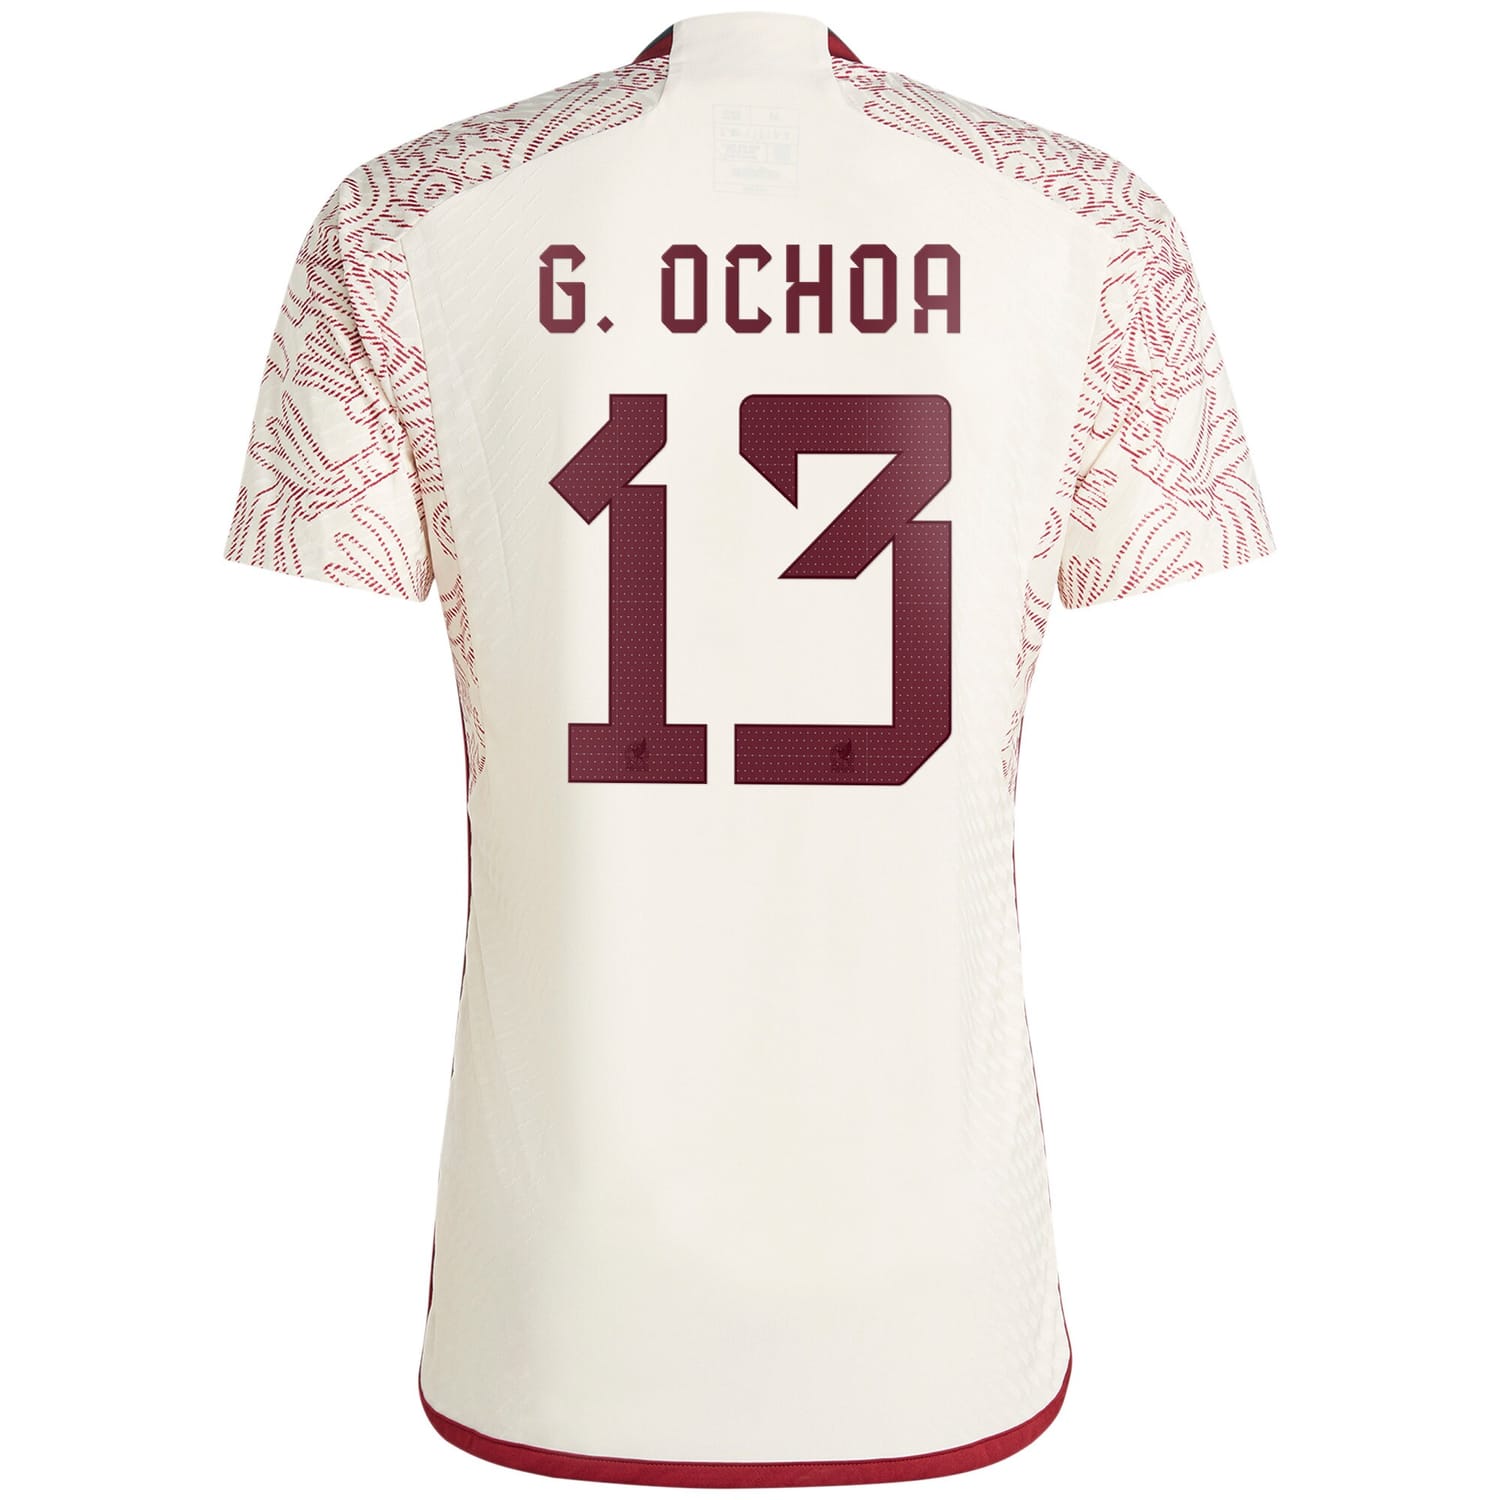 Mexico National Team Away Authentic Jersey Shirt White 2022-23 player Guillermo Ochoa printing for Men